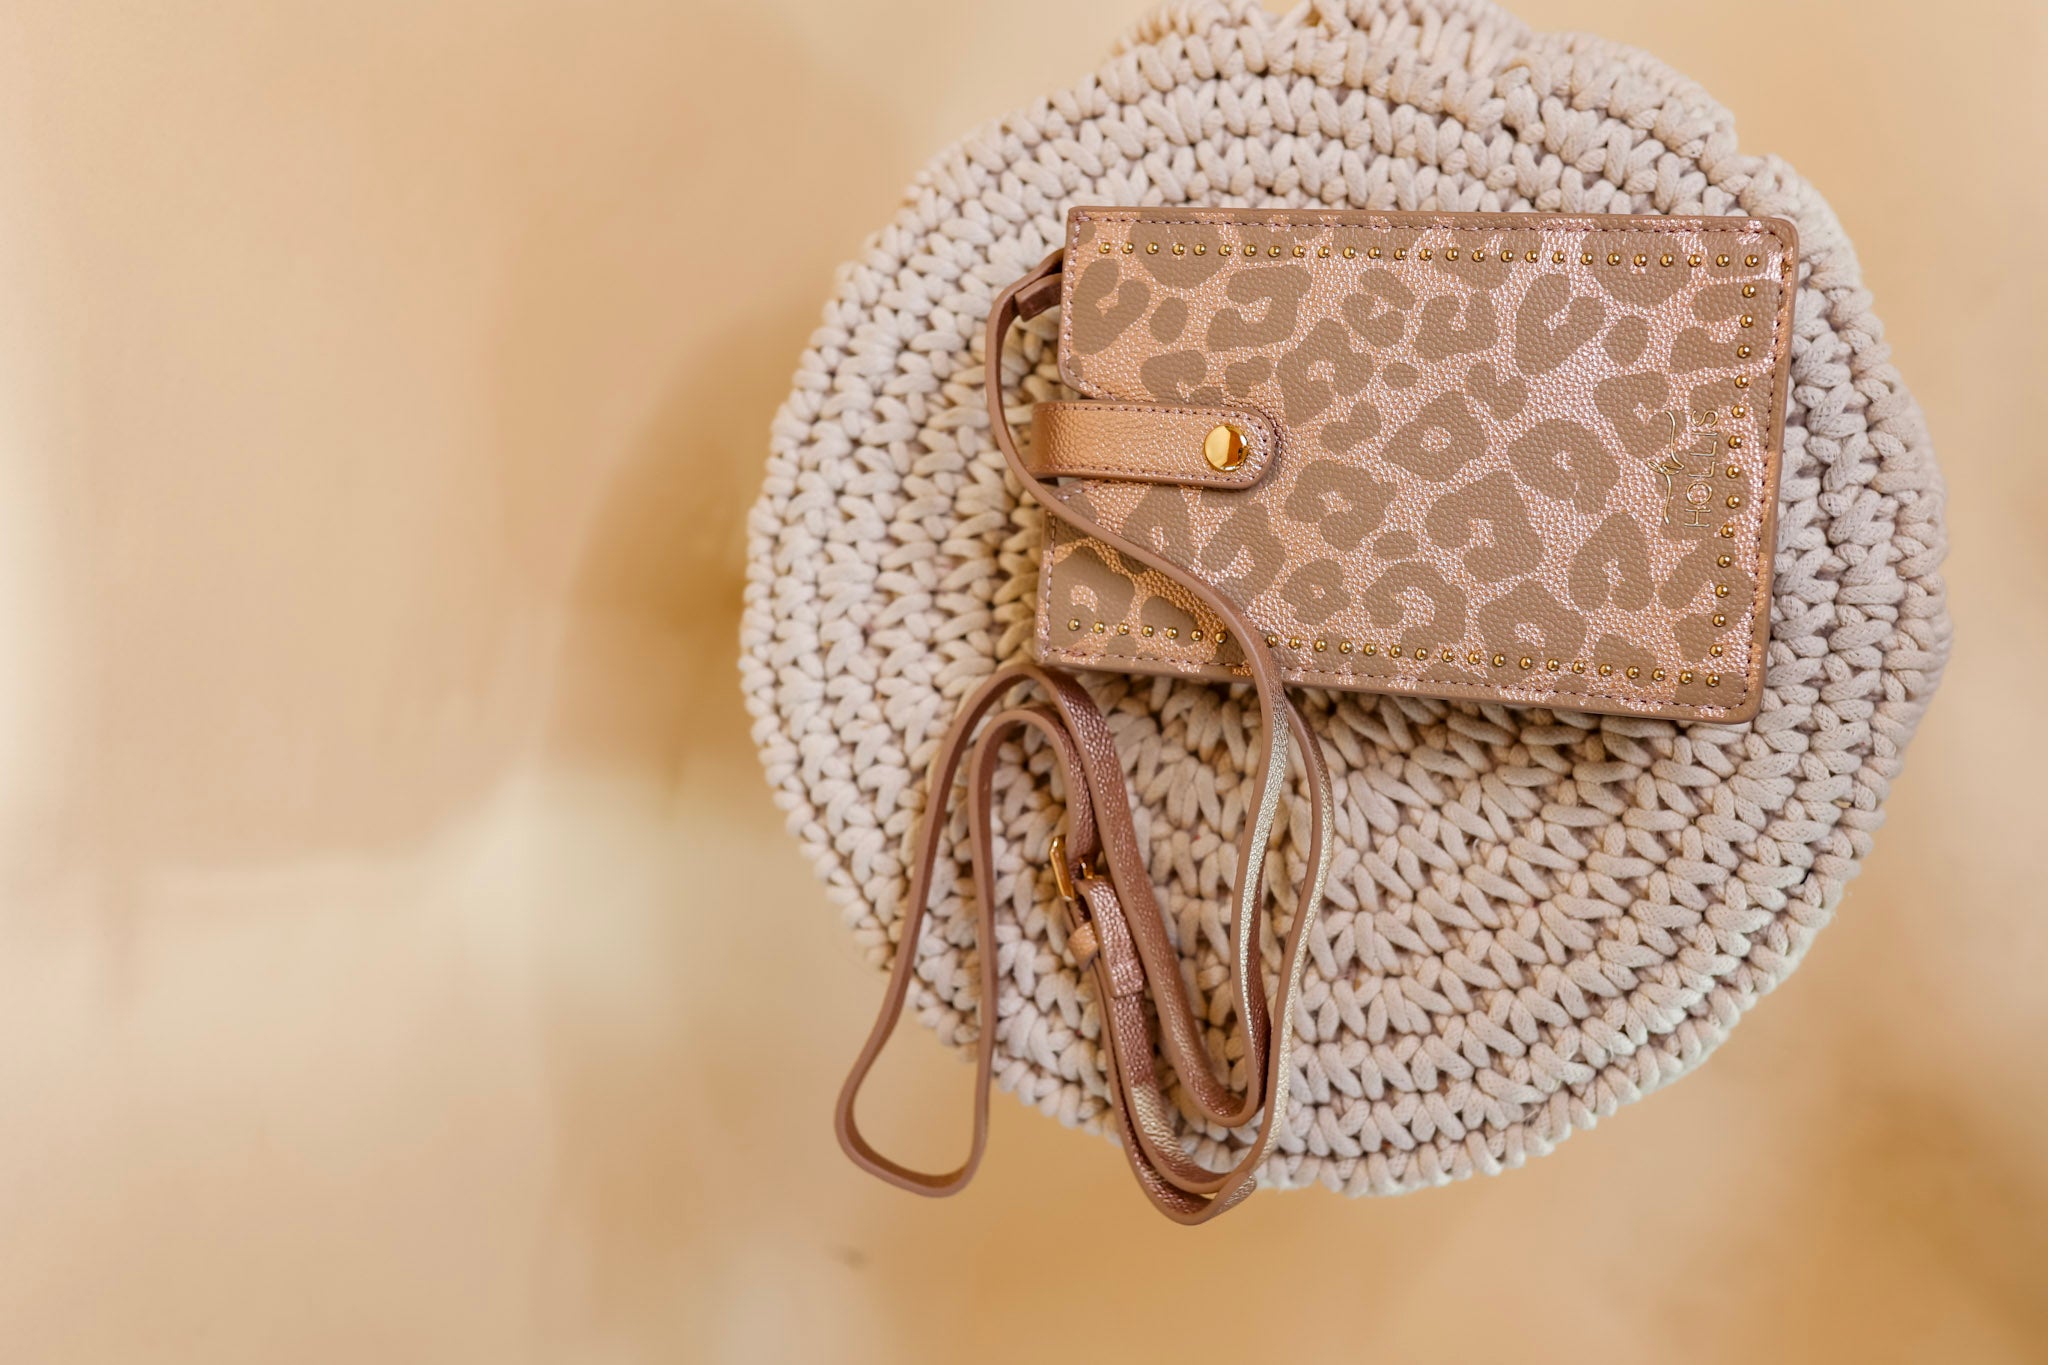 Hollis | Call You Later Crossbody Purse in Leopard - Giddy Up Glamour Boutique